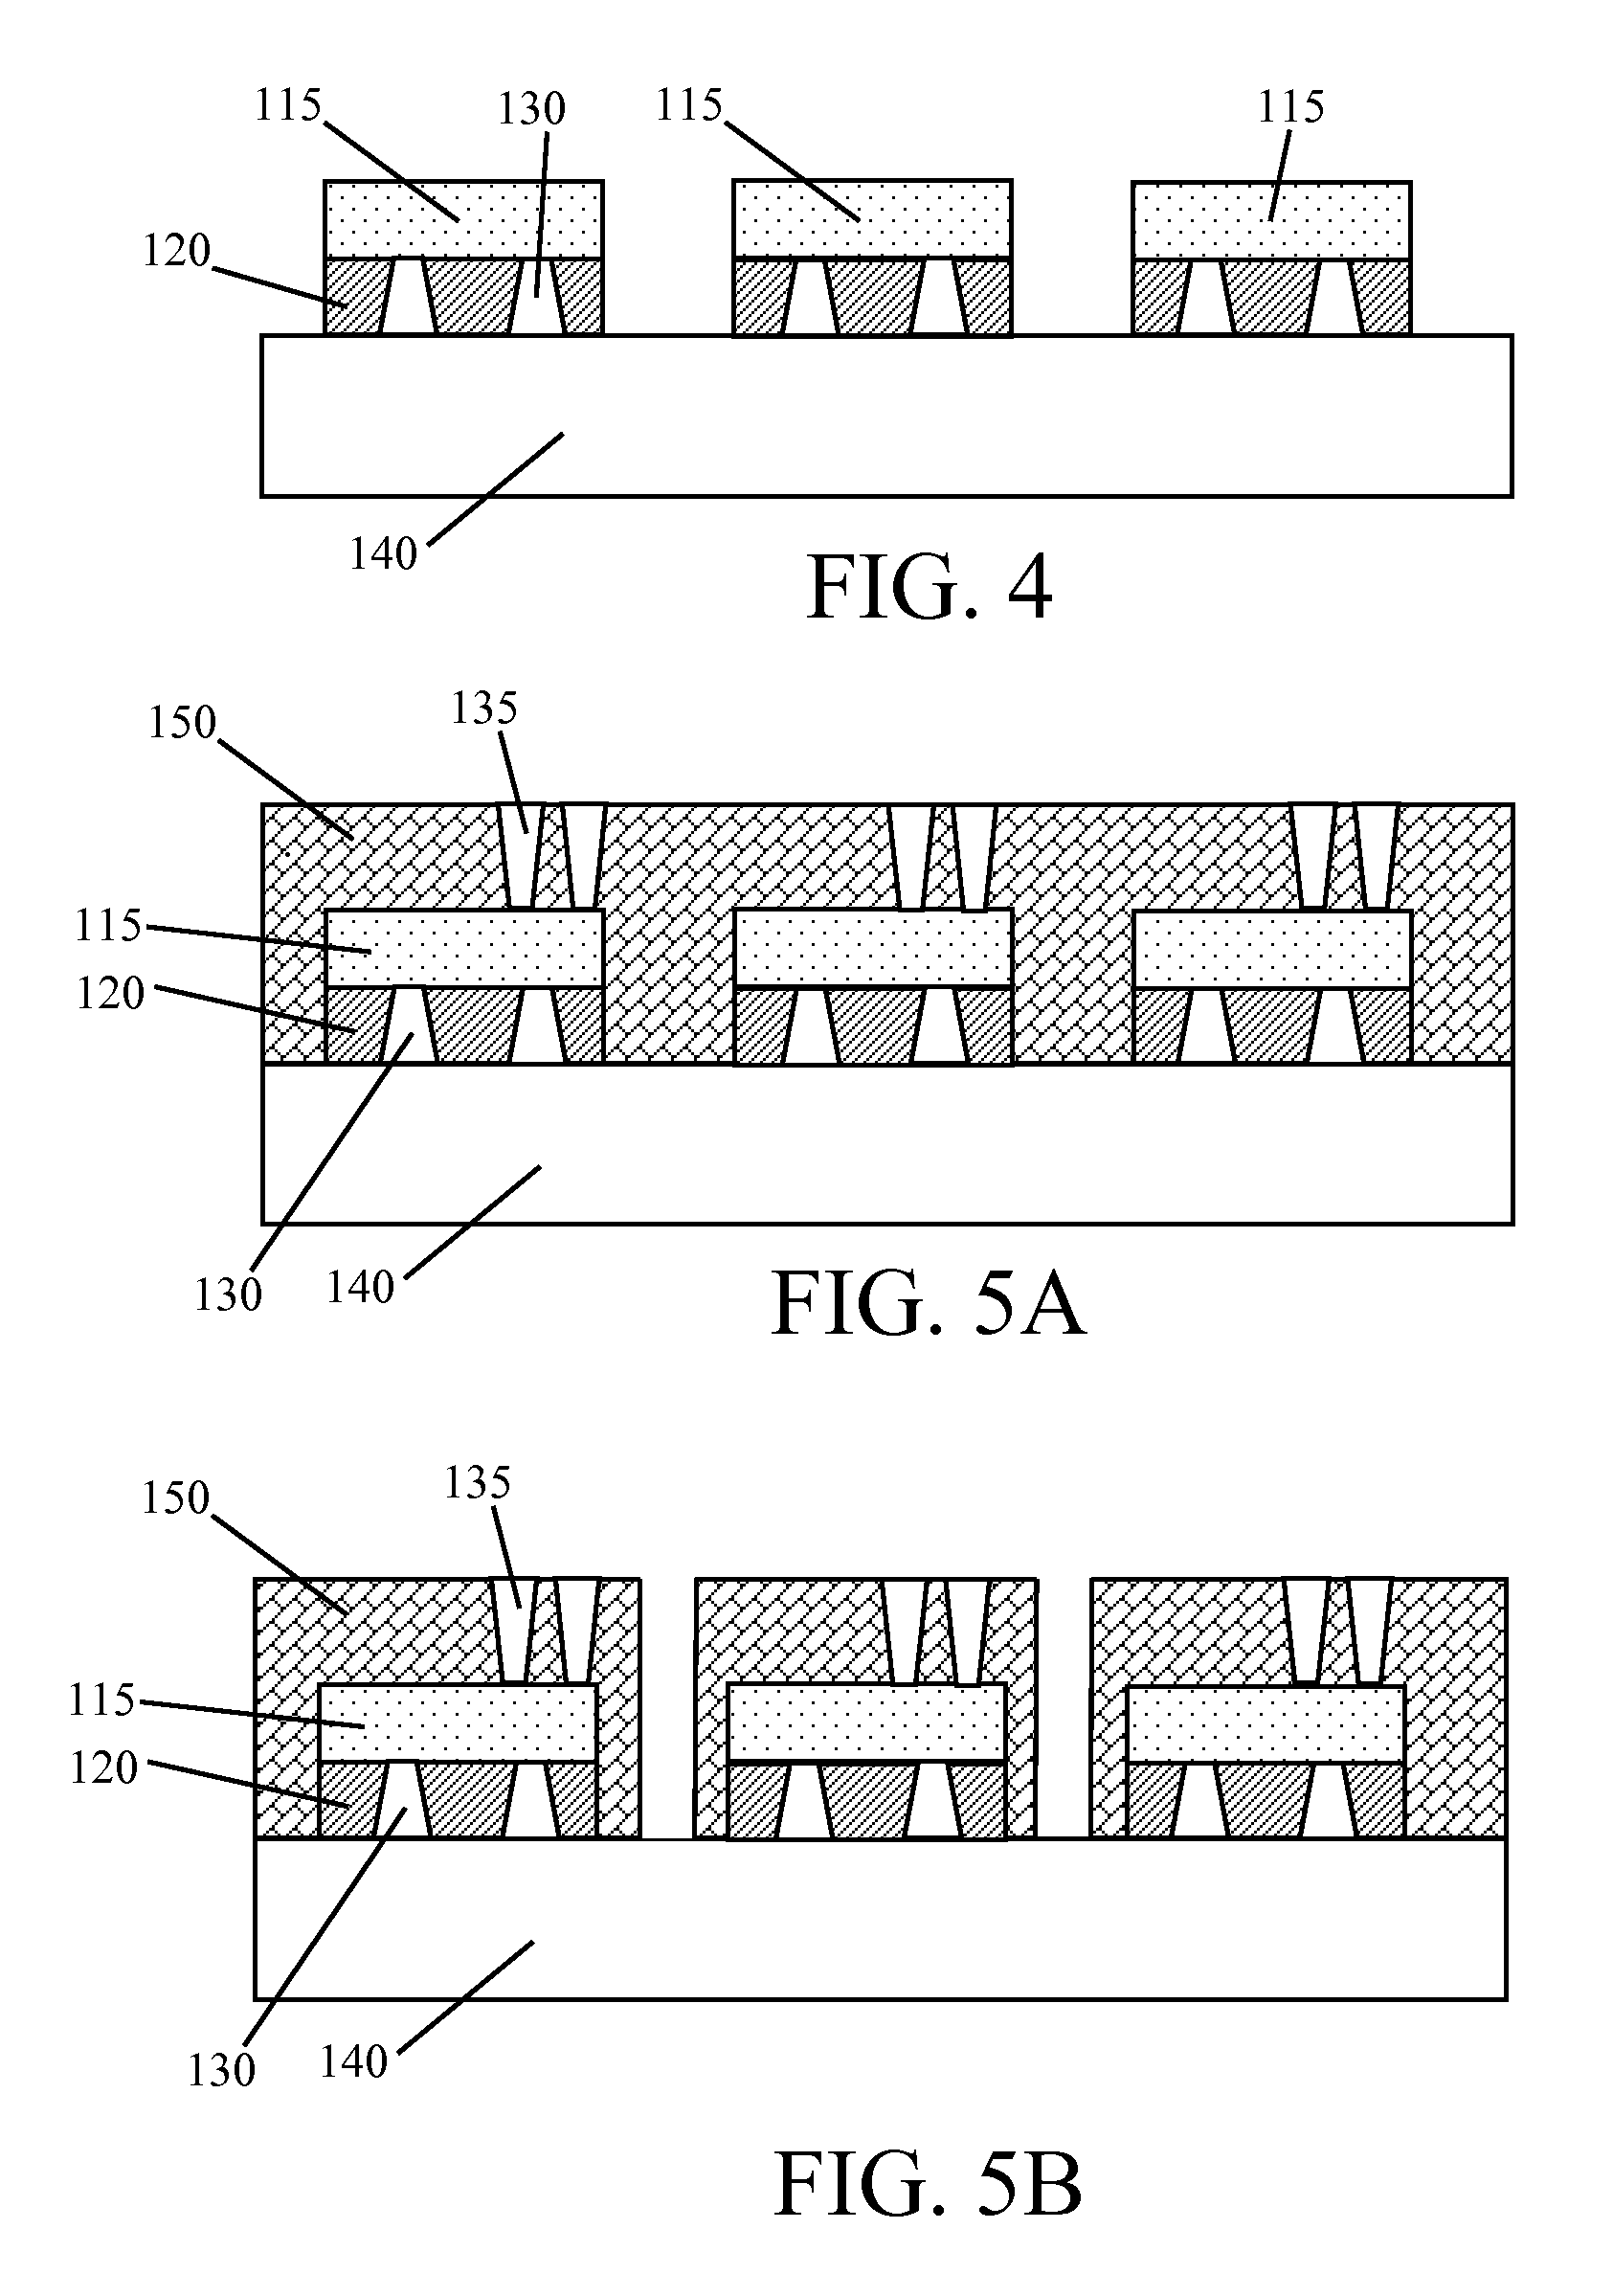 Method of producing encapsulated IC devices on a wafer